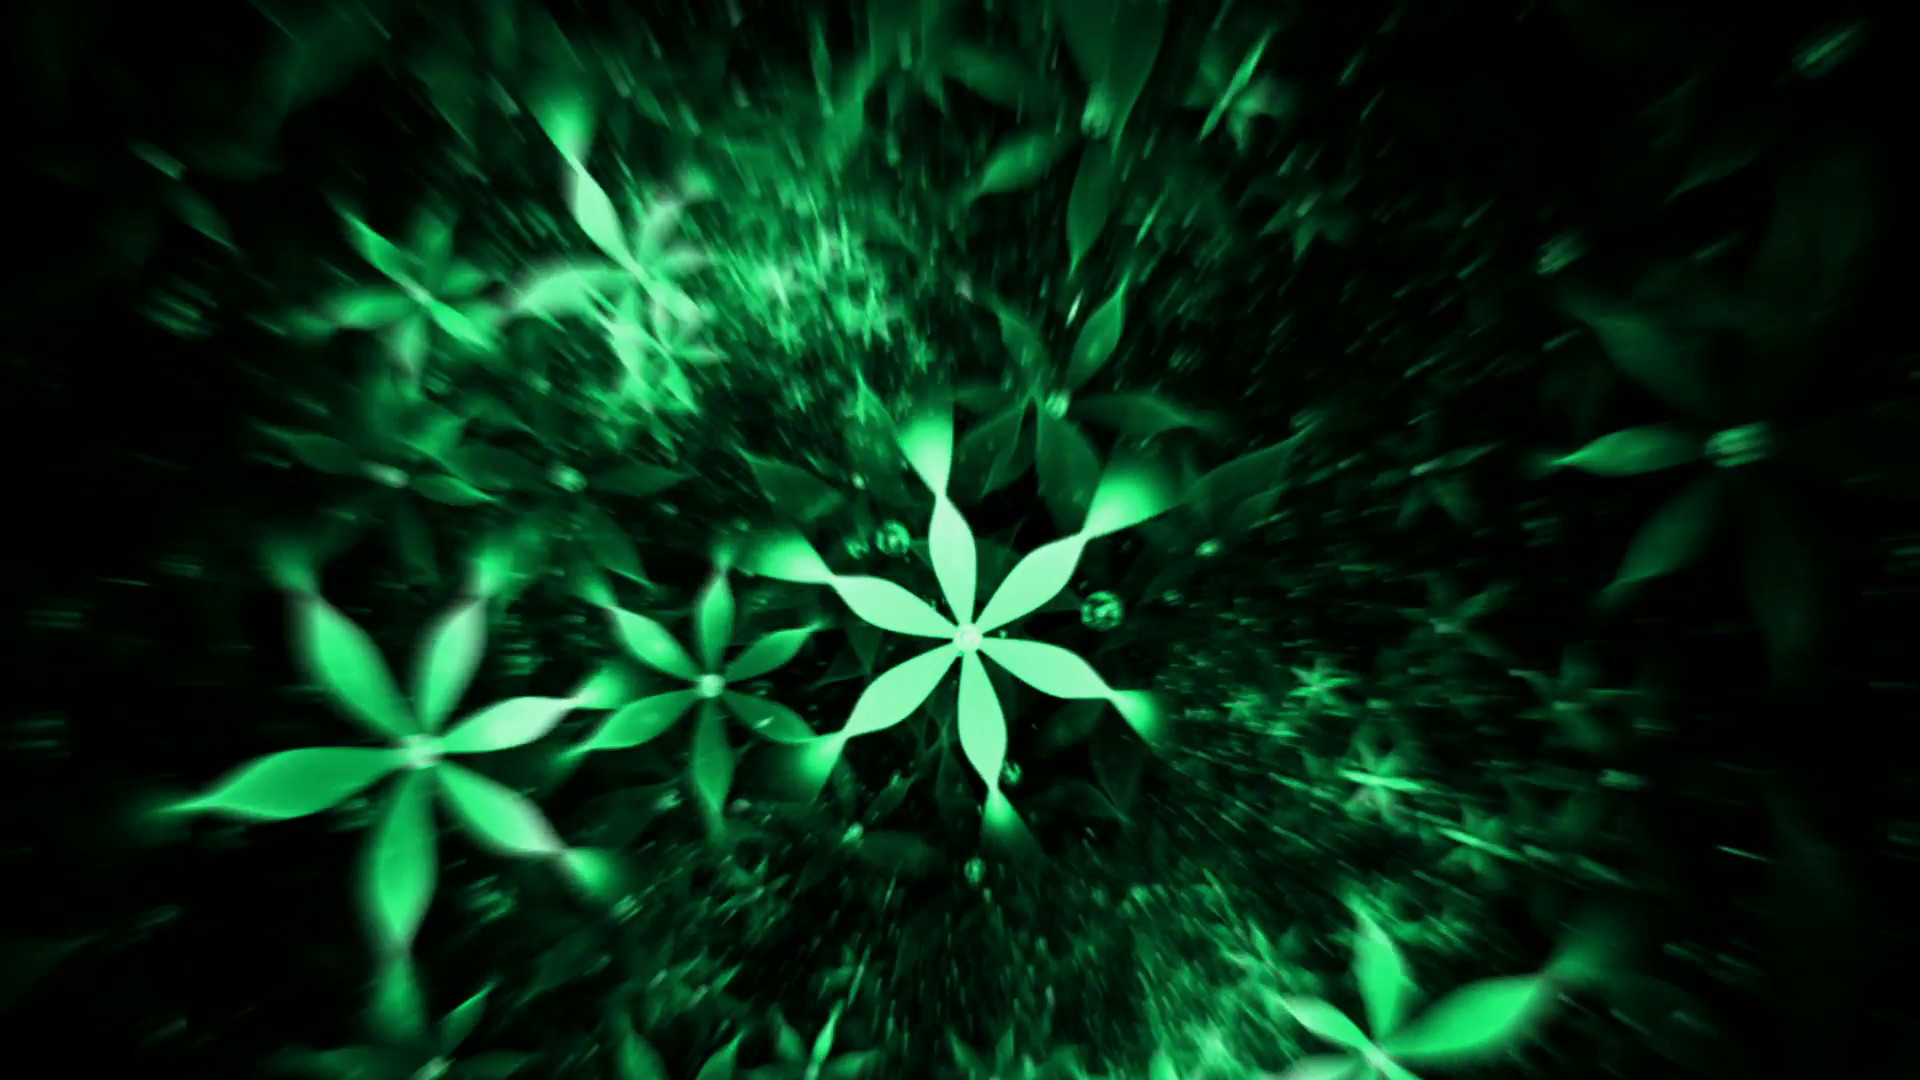 1920x1080 Whirlpool Of Green Flowers, Floral Background - floral background, green  flowers in circular motion on black, abstract illustration, animation,  30fps, ...